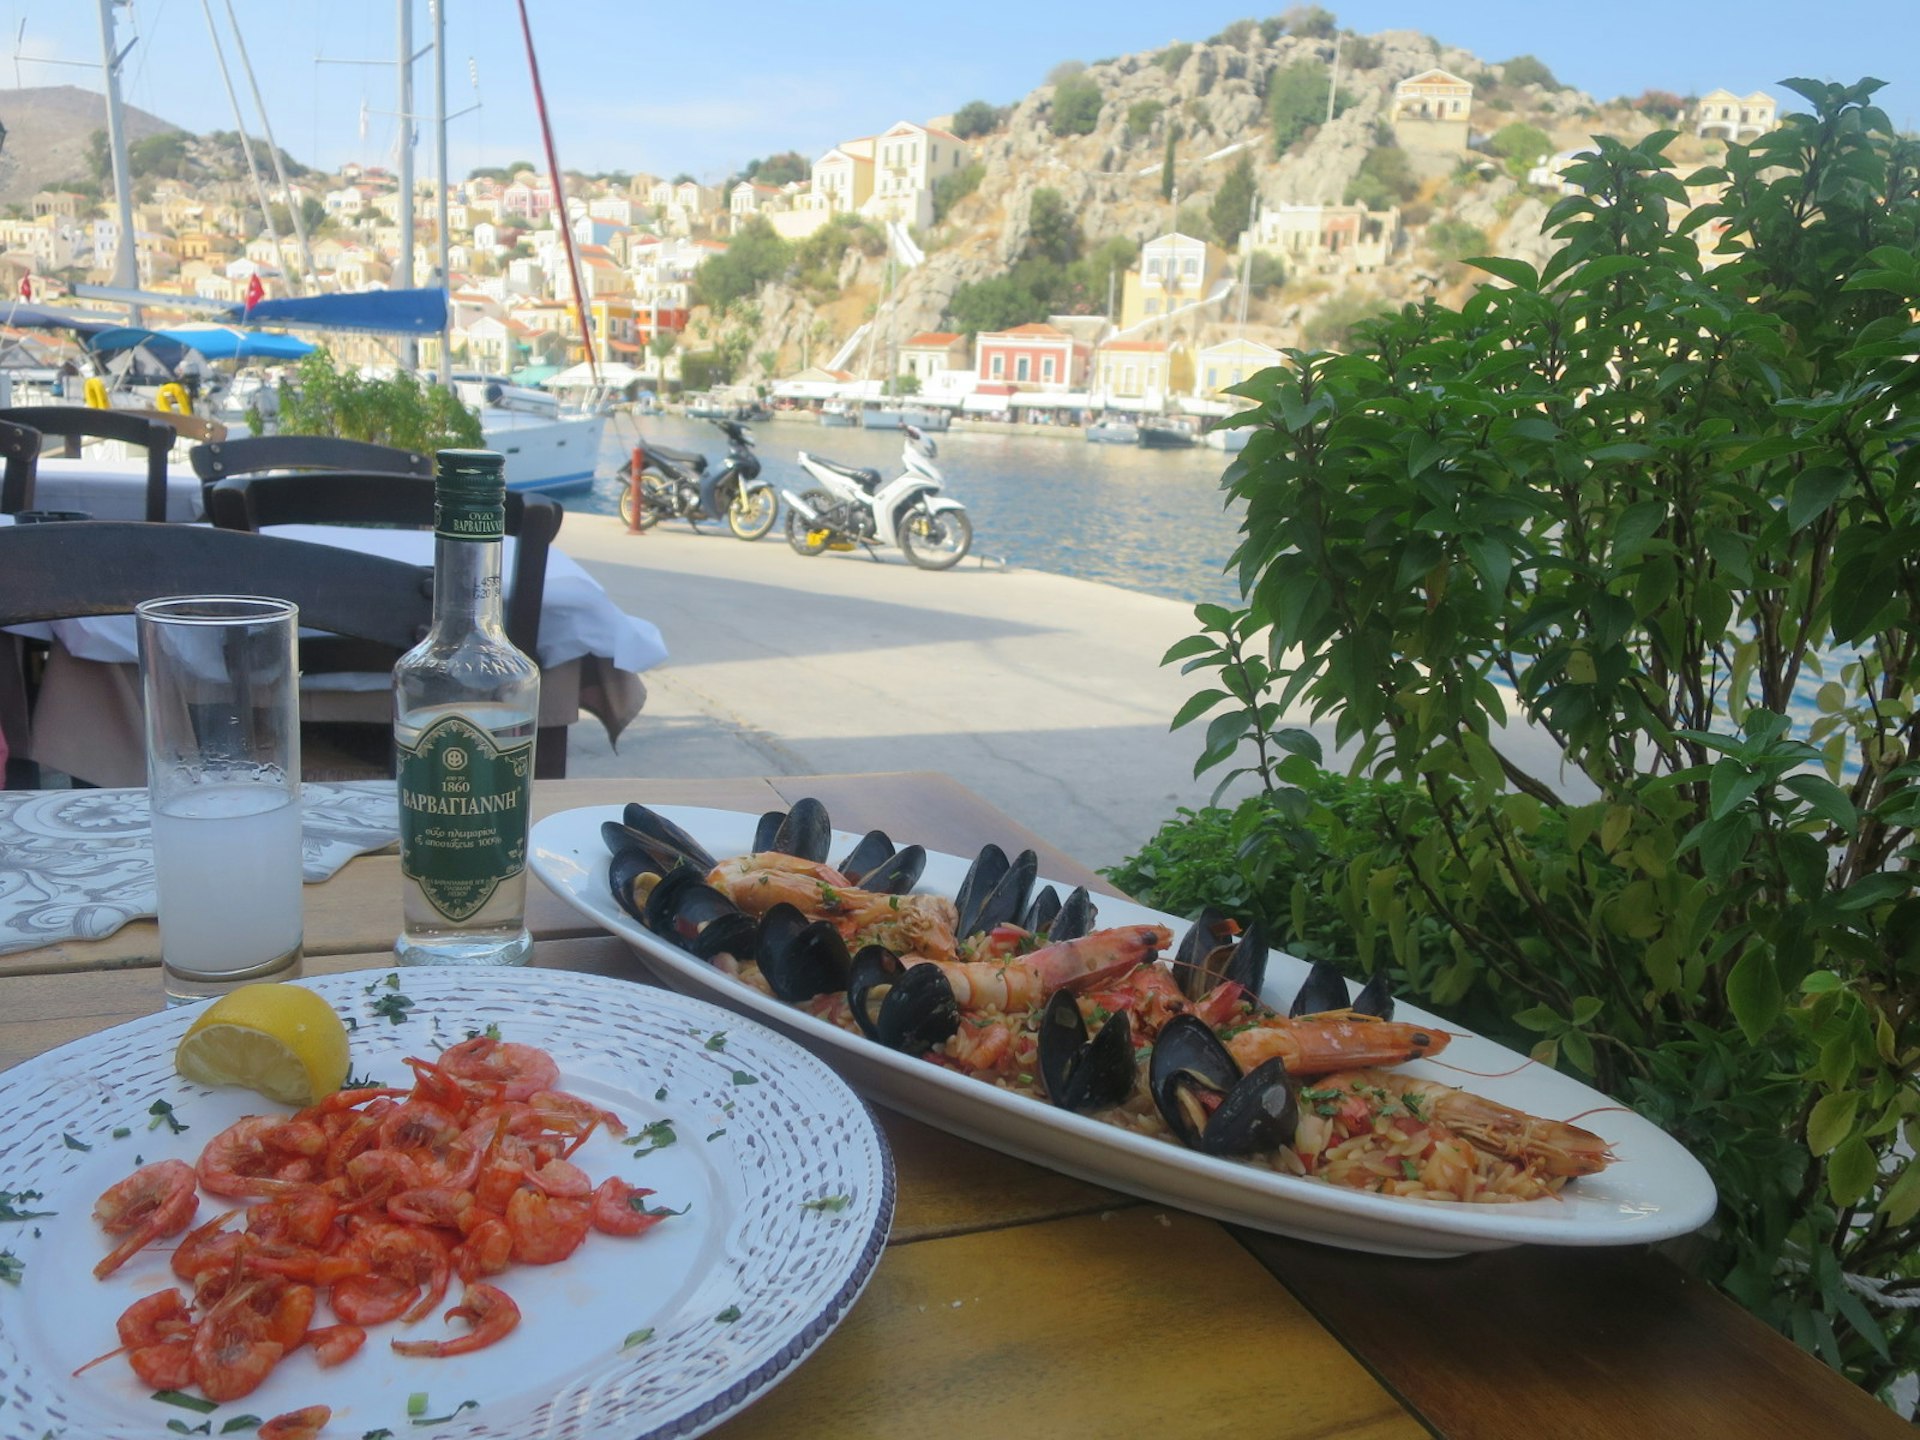 The Symi shrimp are tiny and sweet and eaten in their entirety, like a soft shell crab